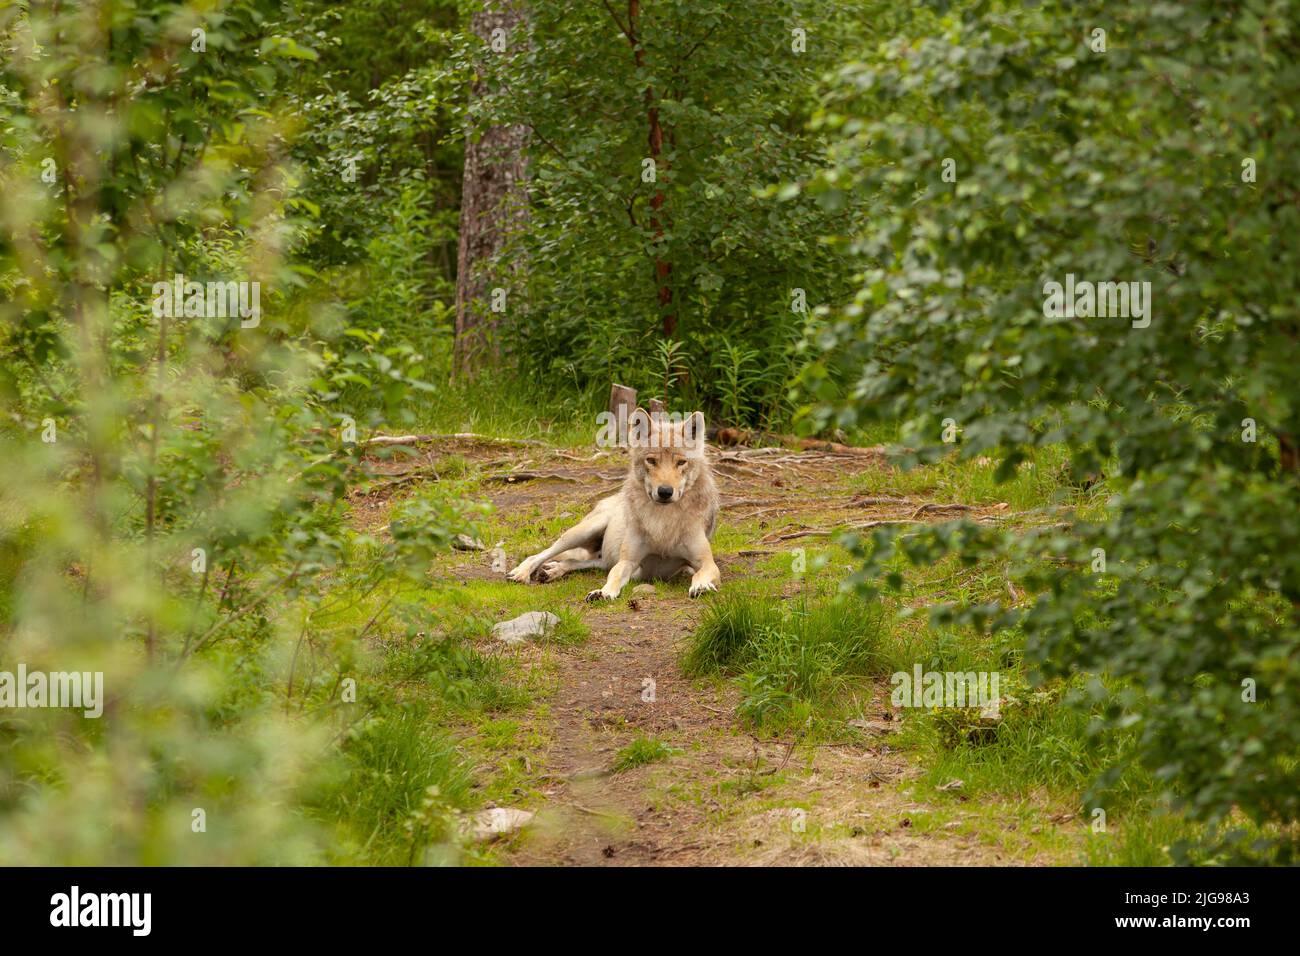 Wolf resting on the ground. Dangerous animal in a forest, looking forward and being calm. Greenery around the beast and a cloudy but warm light. Stock Photo